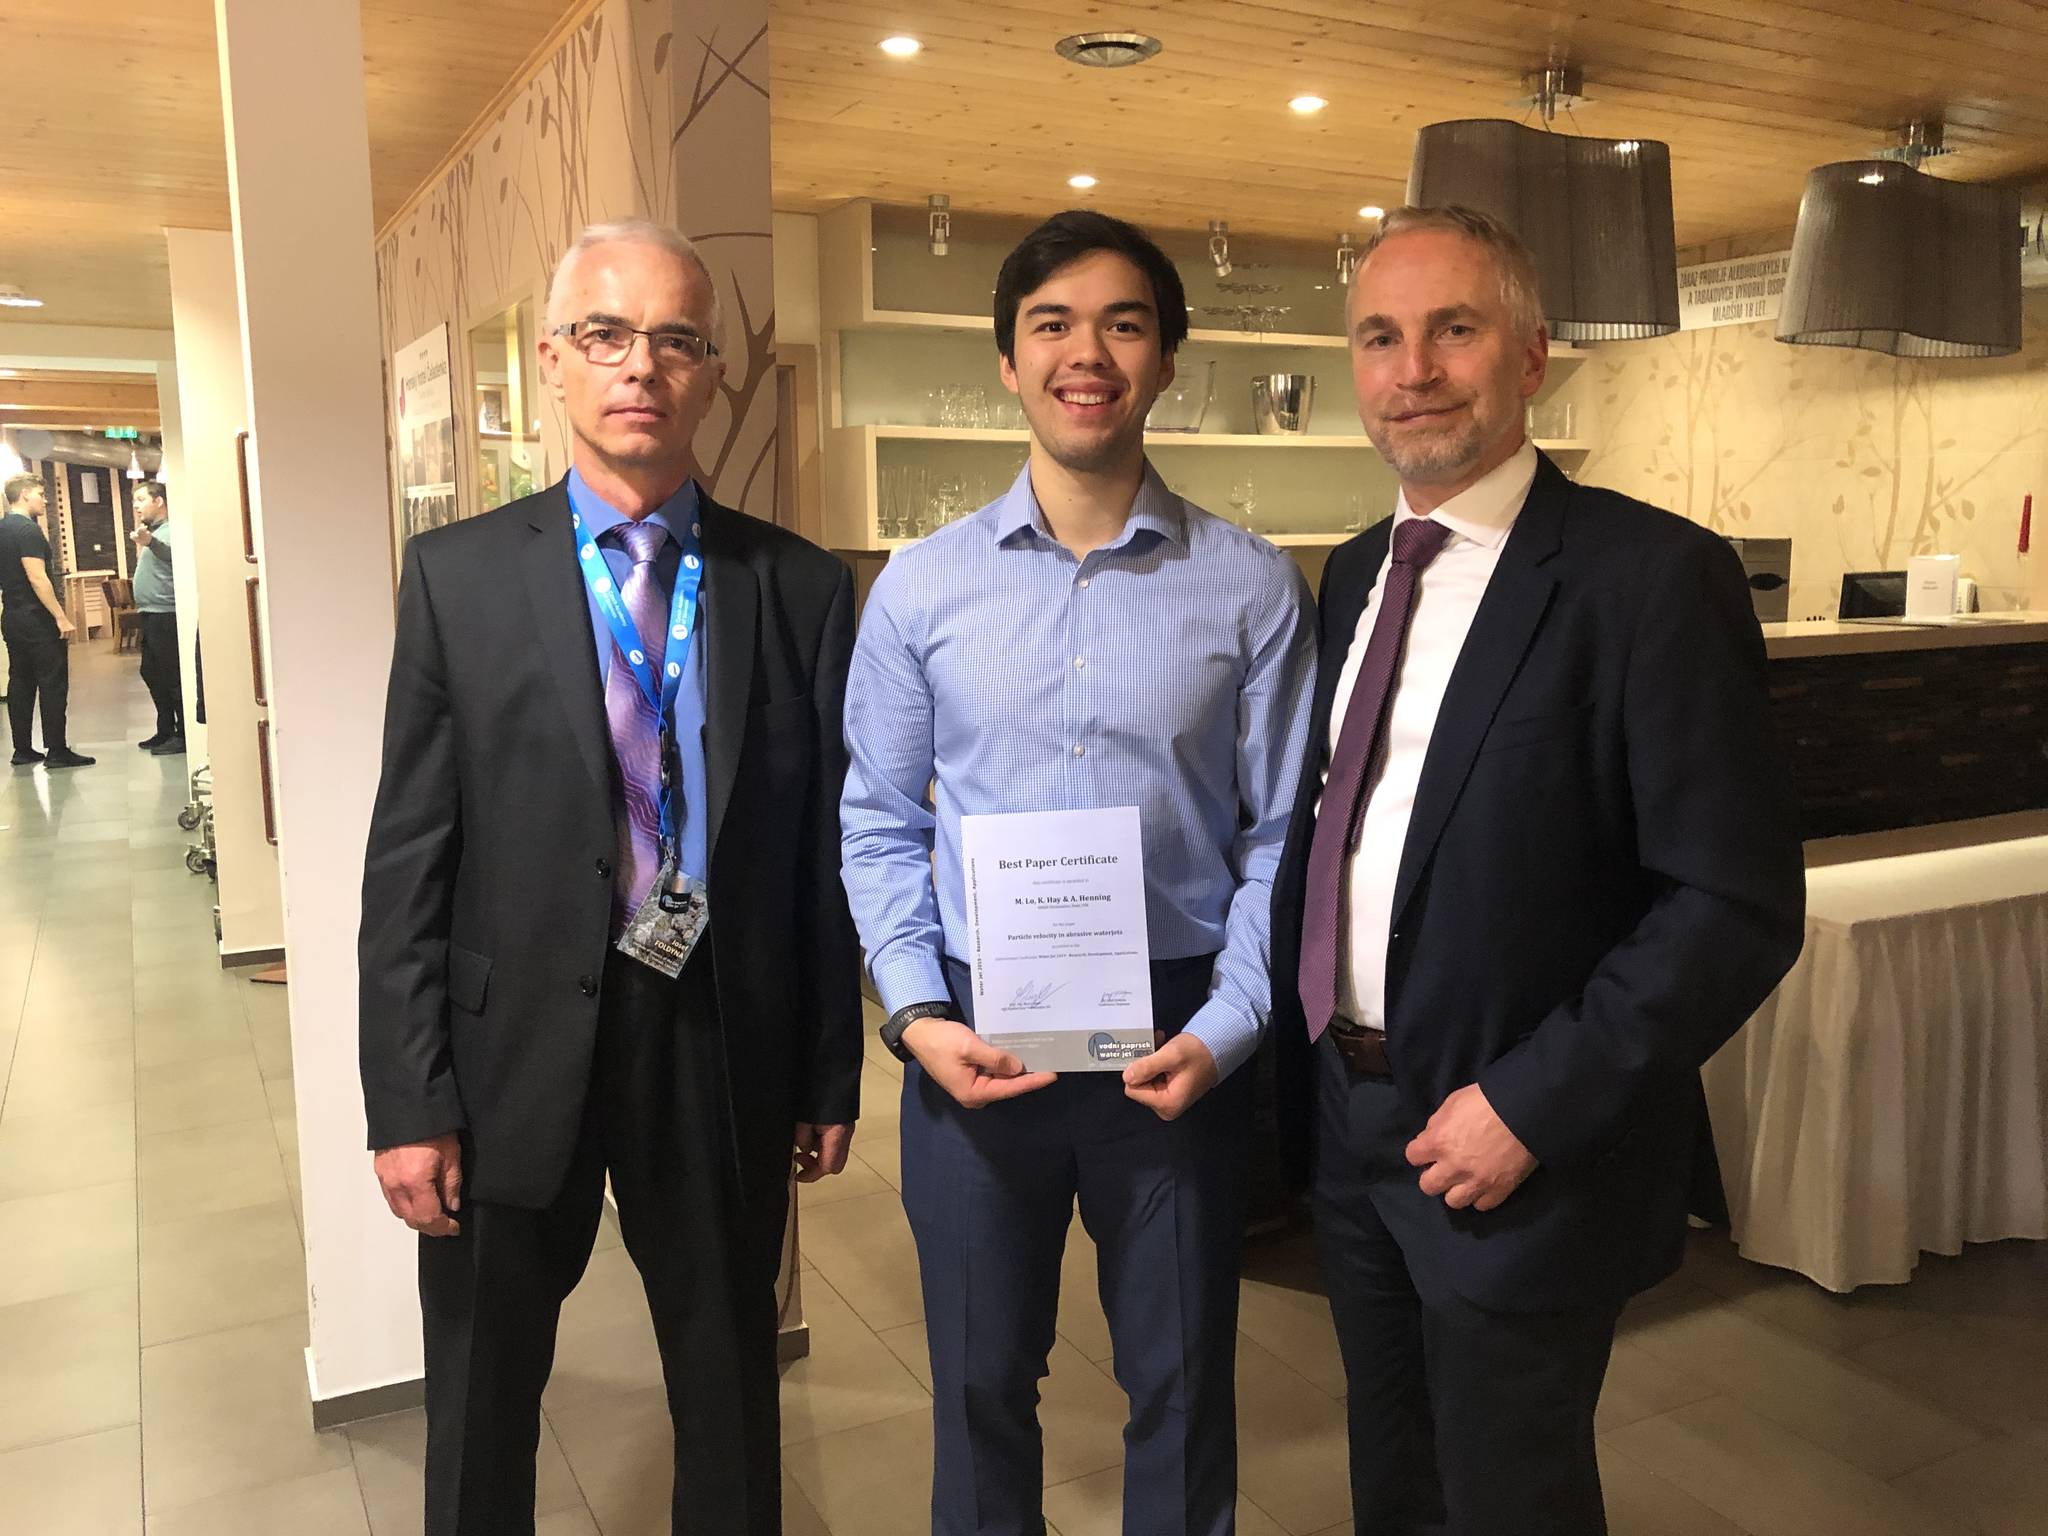 Dr. Joseph Foldyn, left, director of the Institute of Geonics of the Czech Academy of Sciences in Ostrava, Czech Republic, presented the Best Paper certificate to Michael Lo, middle, and Dr. Axel Henning, right of OMAX Corporation. COURTESY PHOTO